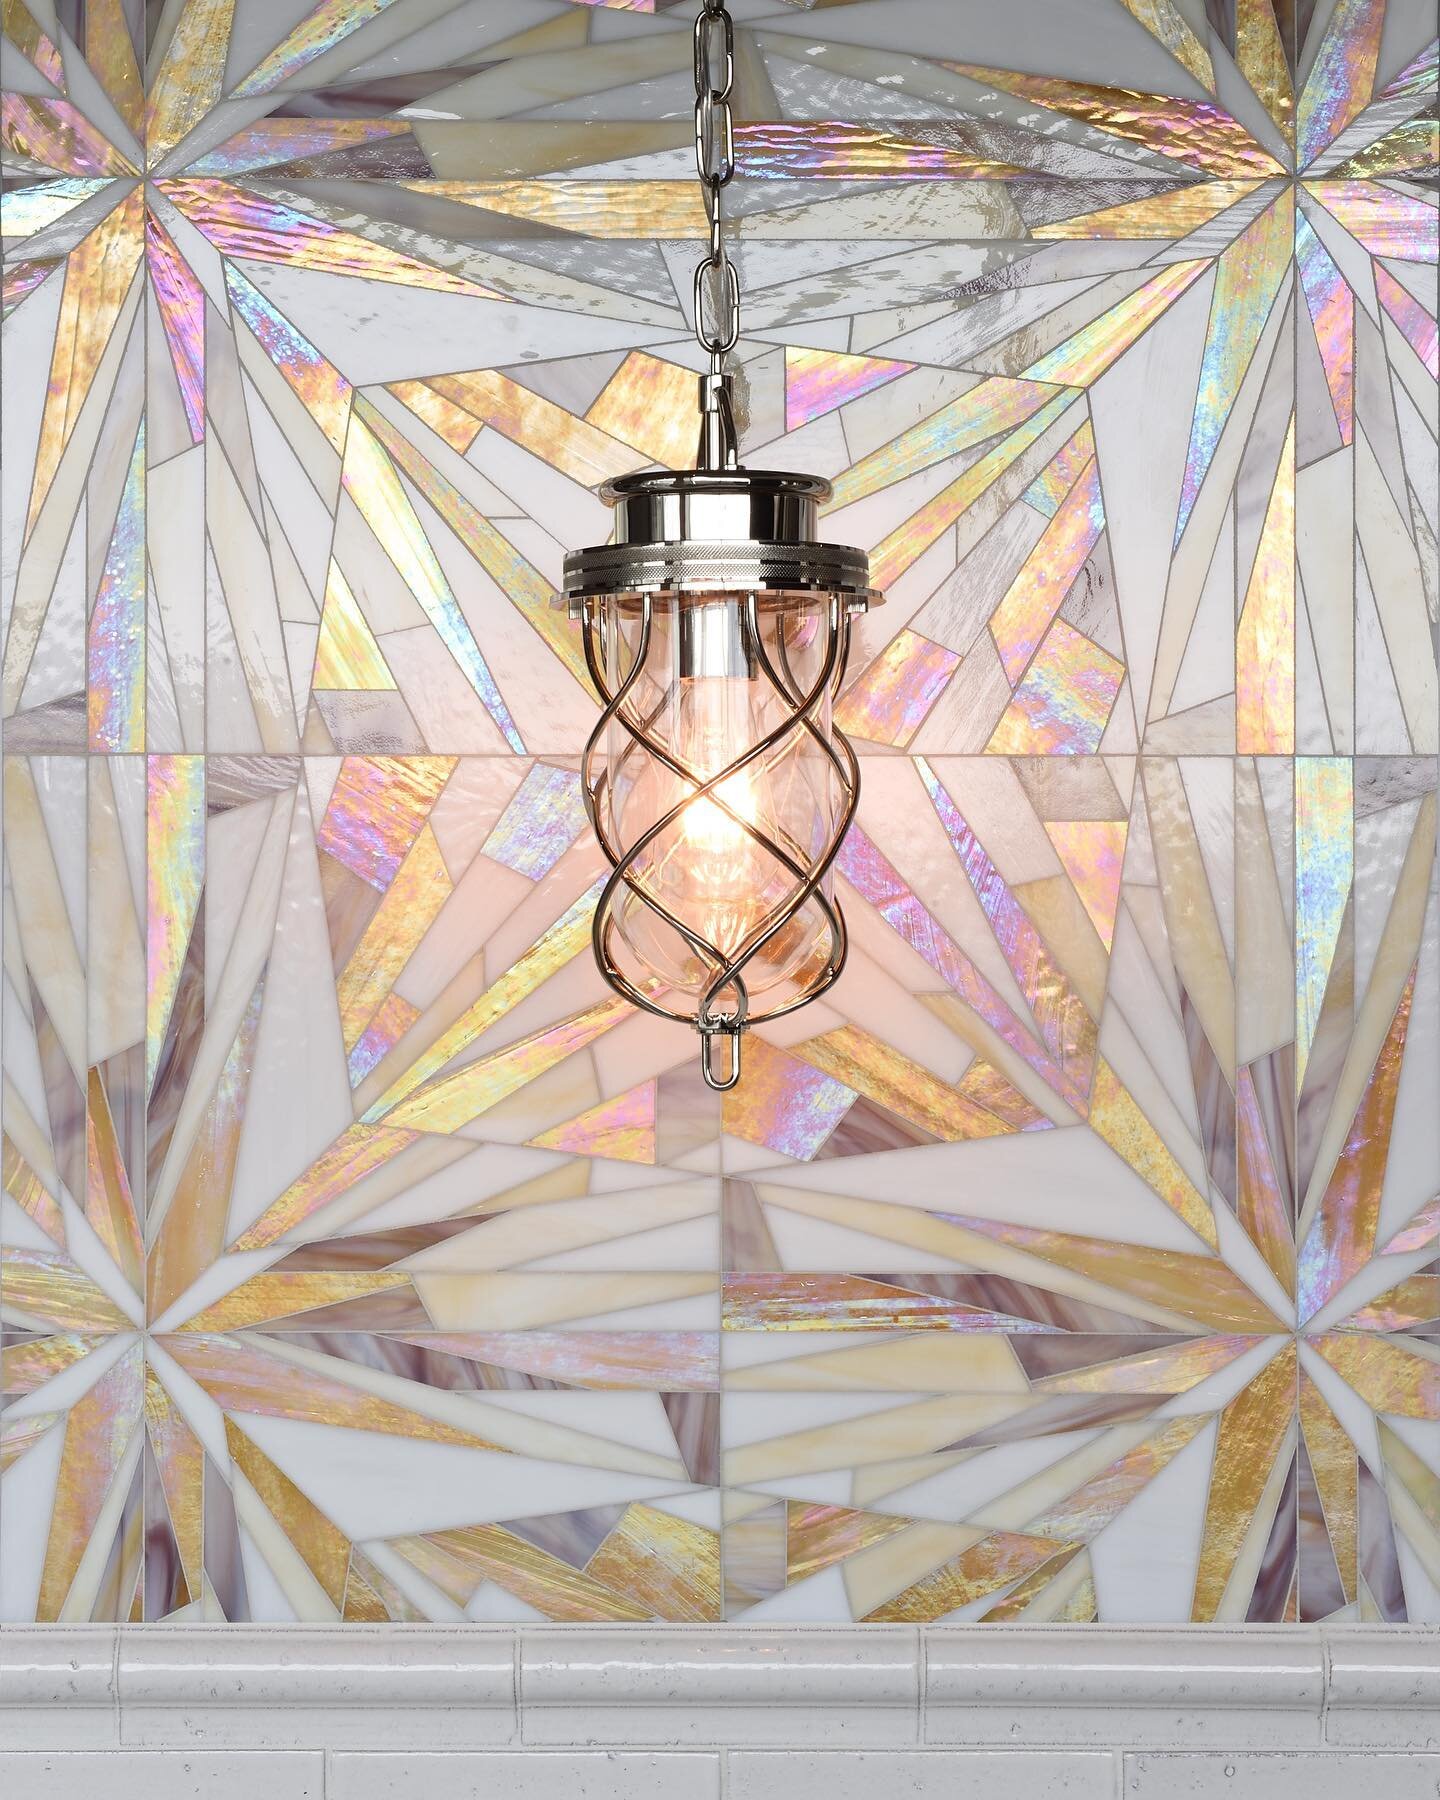 Iridescence at its best!✨Jewel 2 from @mosaiquesurface ,featured in the new Gem Glass collection.